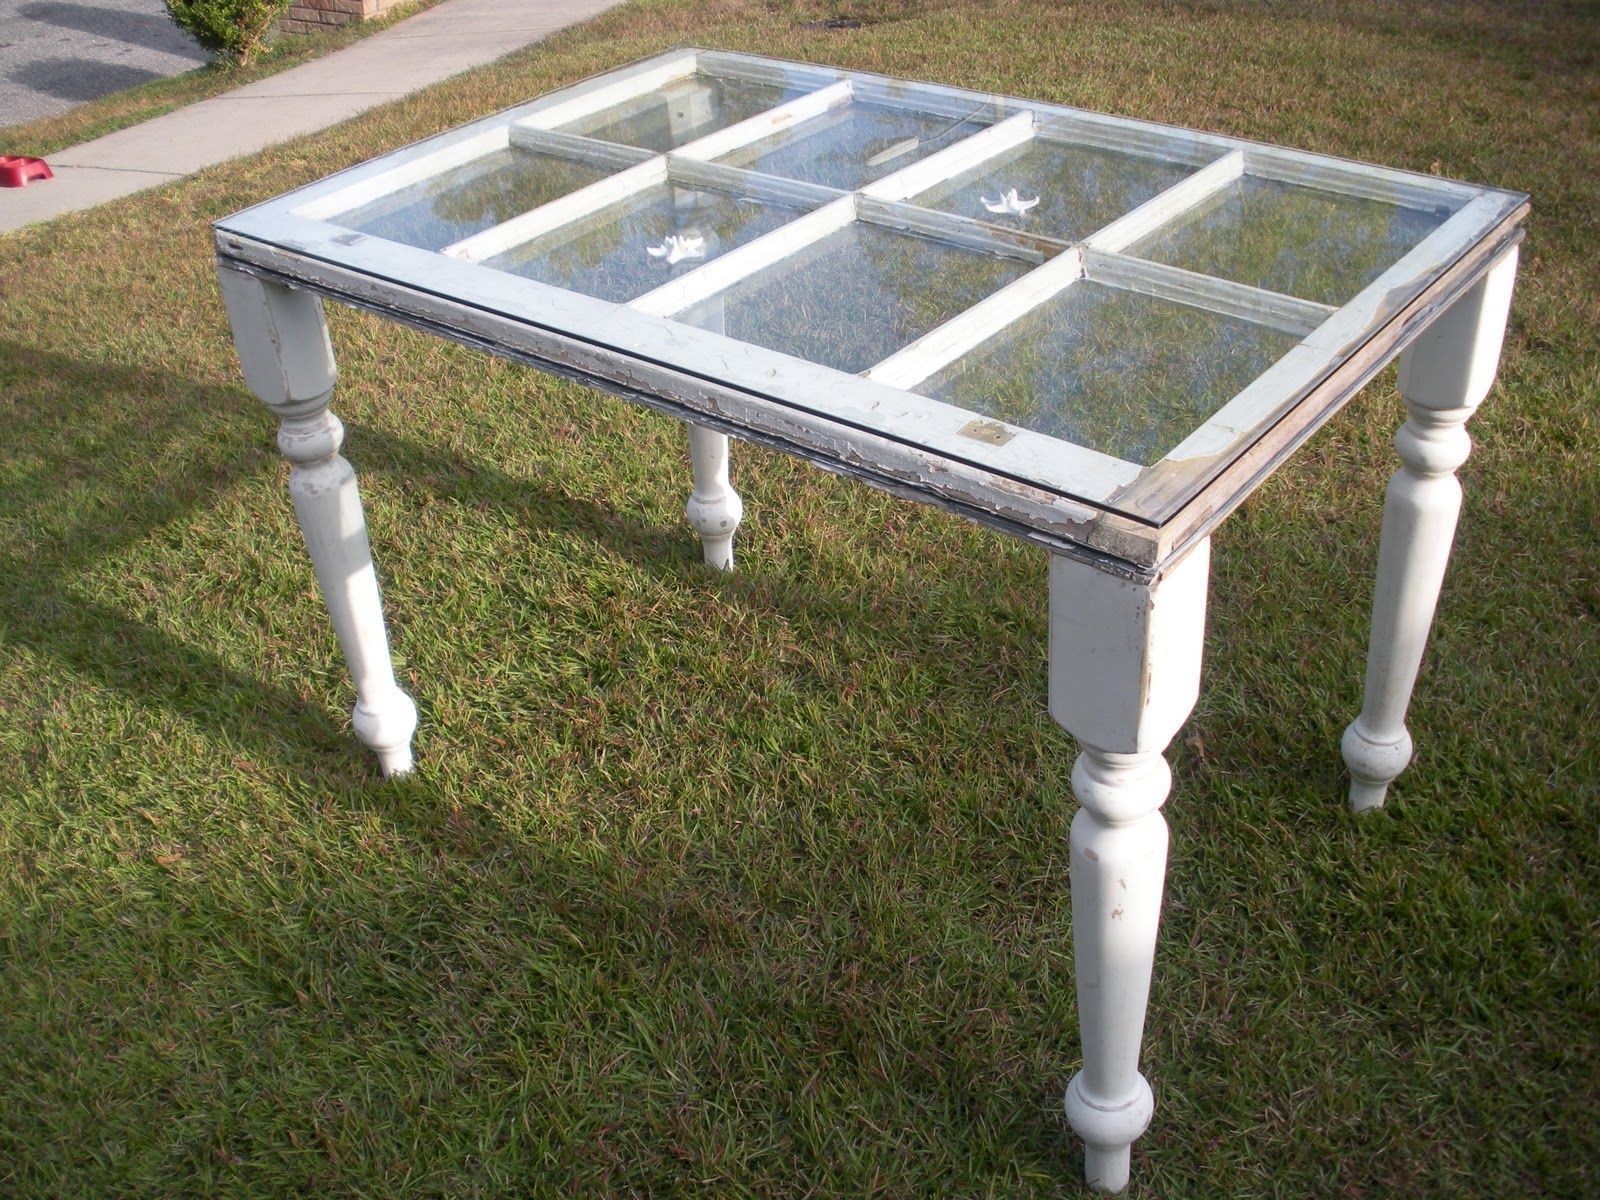 Old Windows For Unique Coffee Tables -   20 diy projects With Pallets old windows ideas